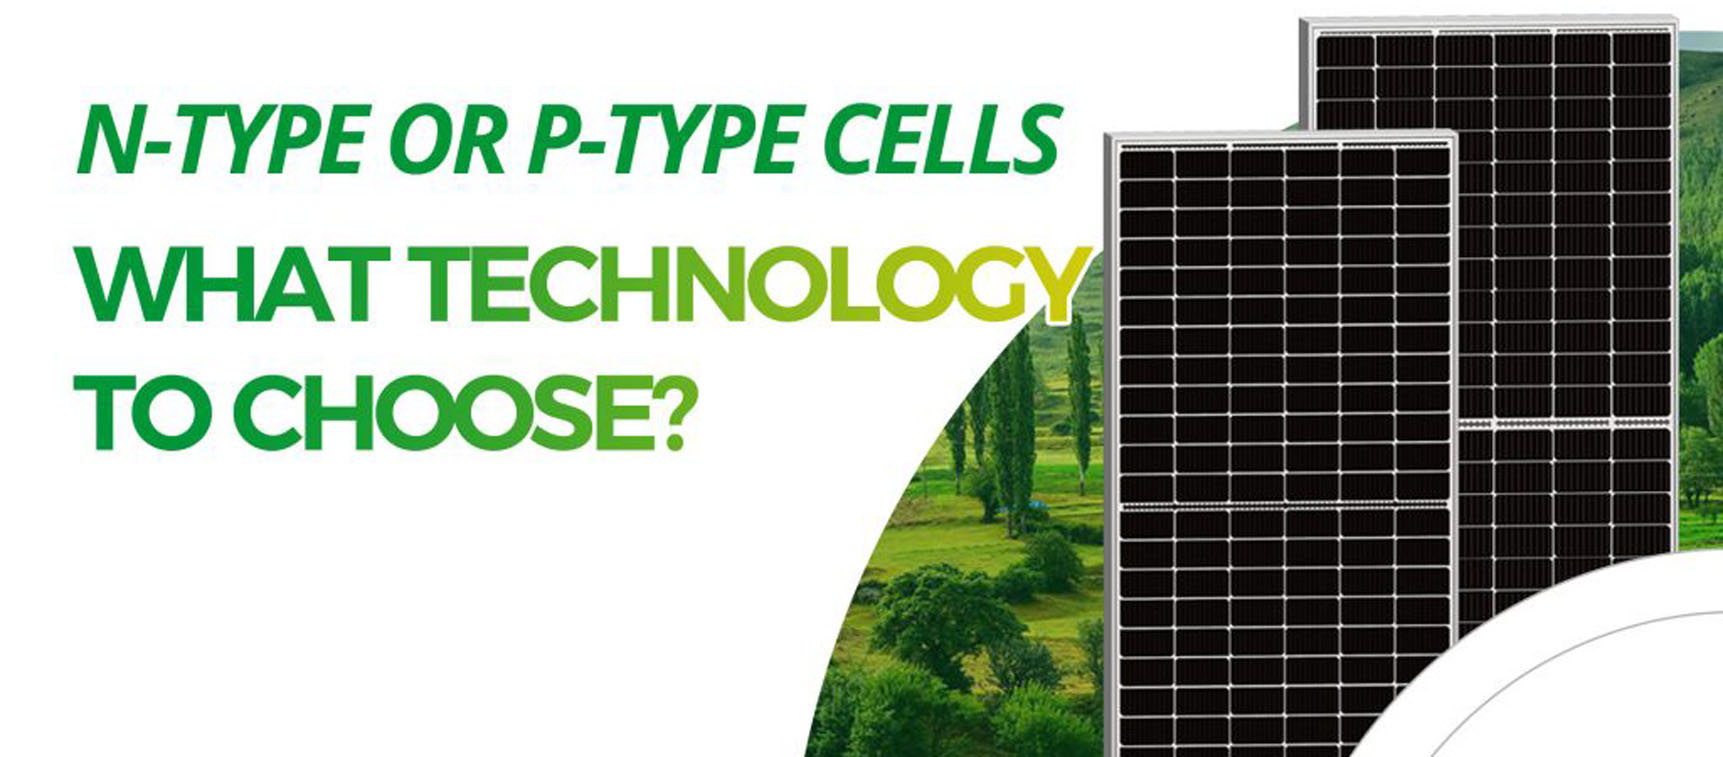 N-type or P-type Cells: What technology to choose